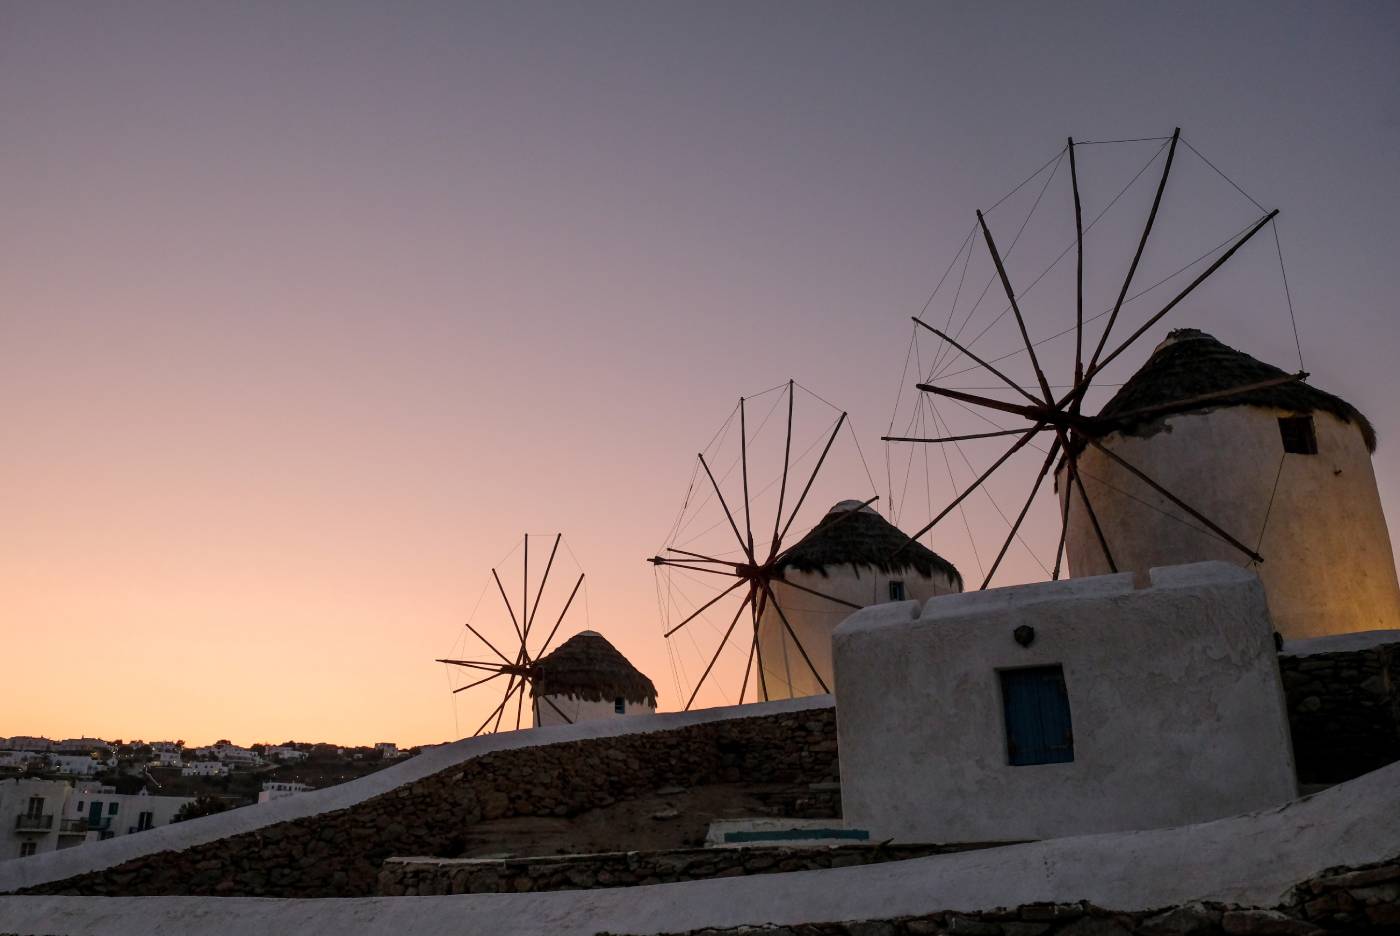 Mykonos is the last destination of the 100% Hotel Workshop Tour in Greece